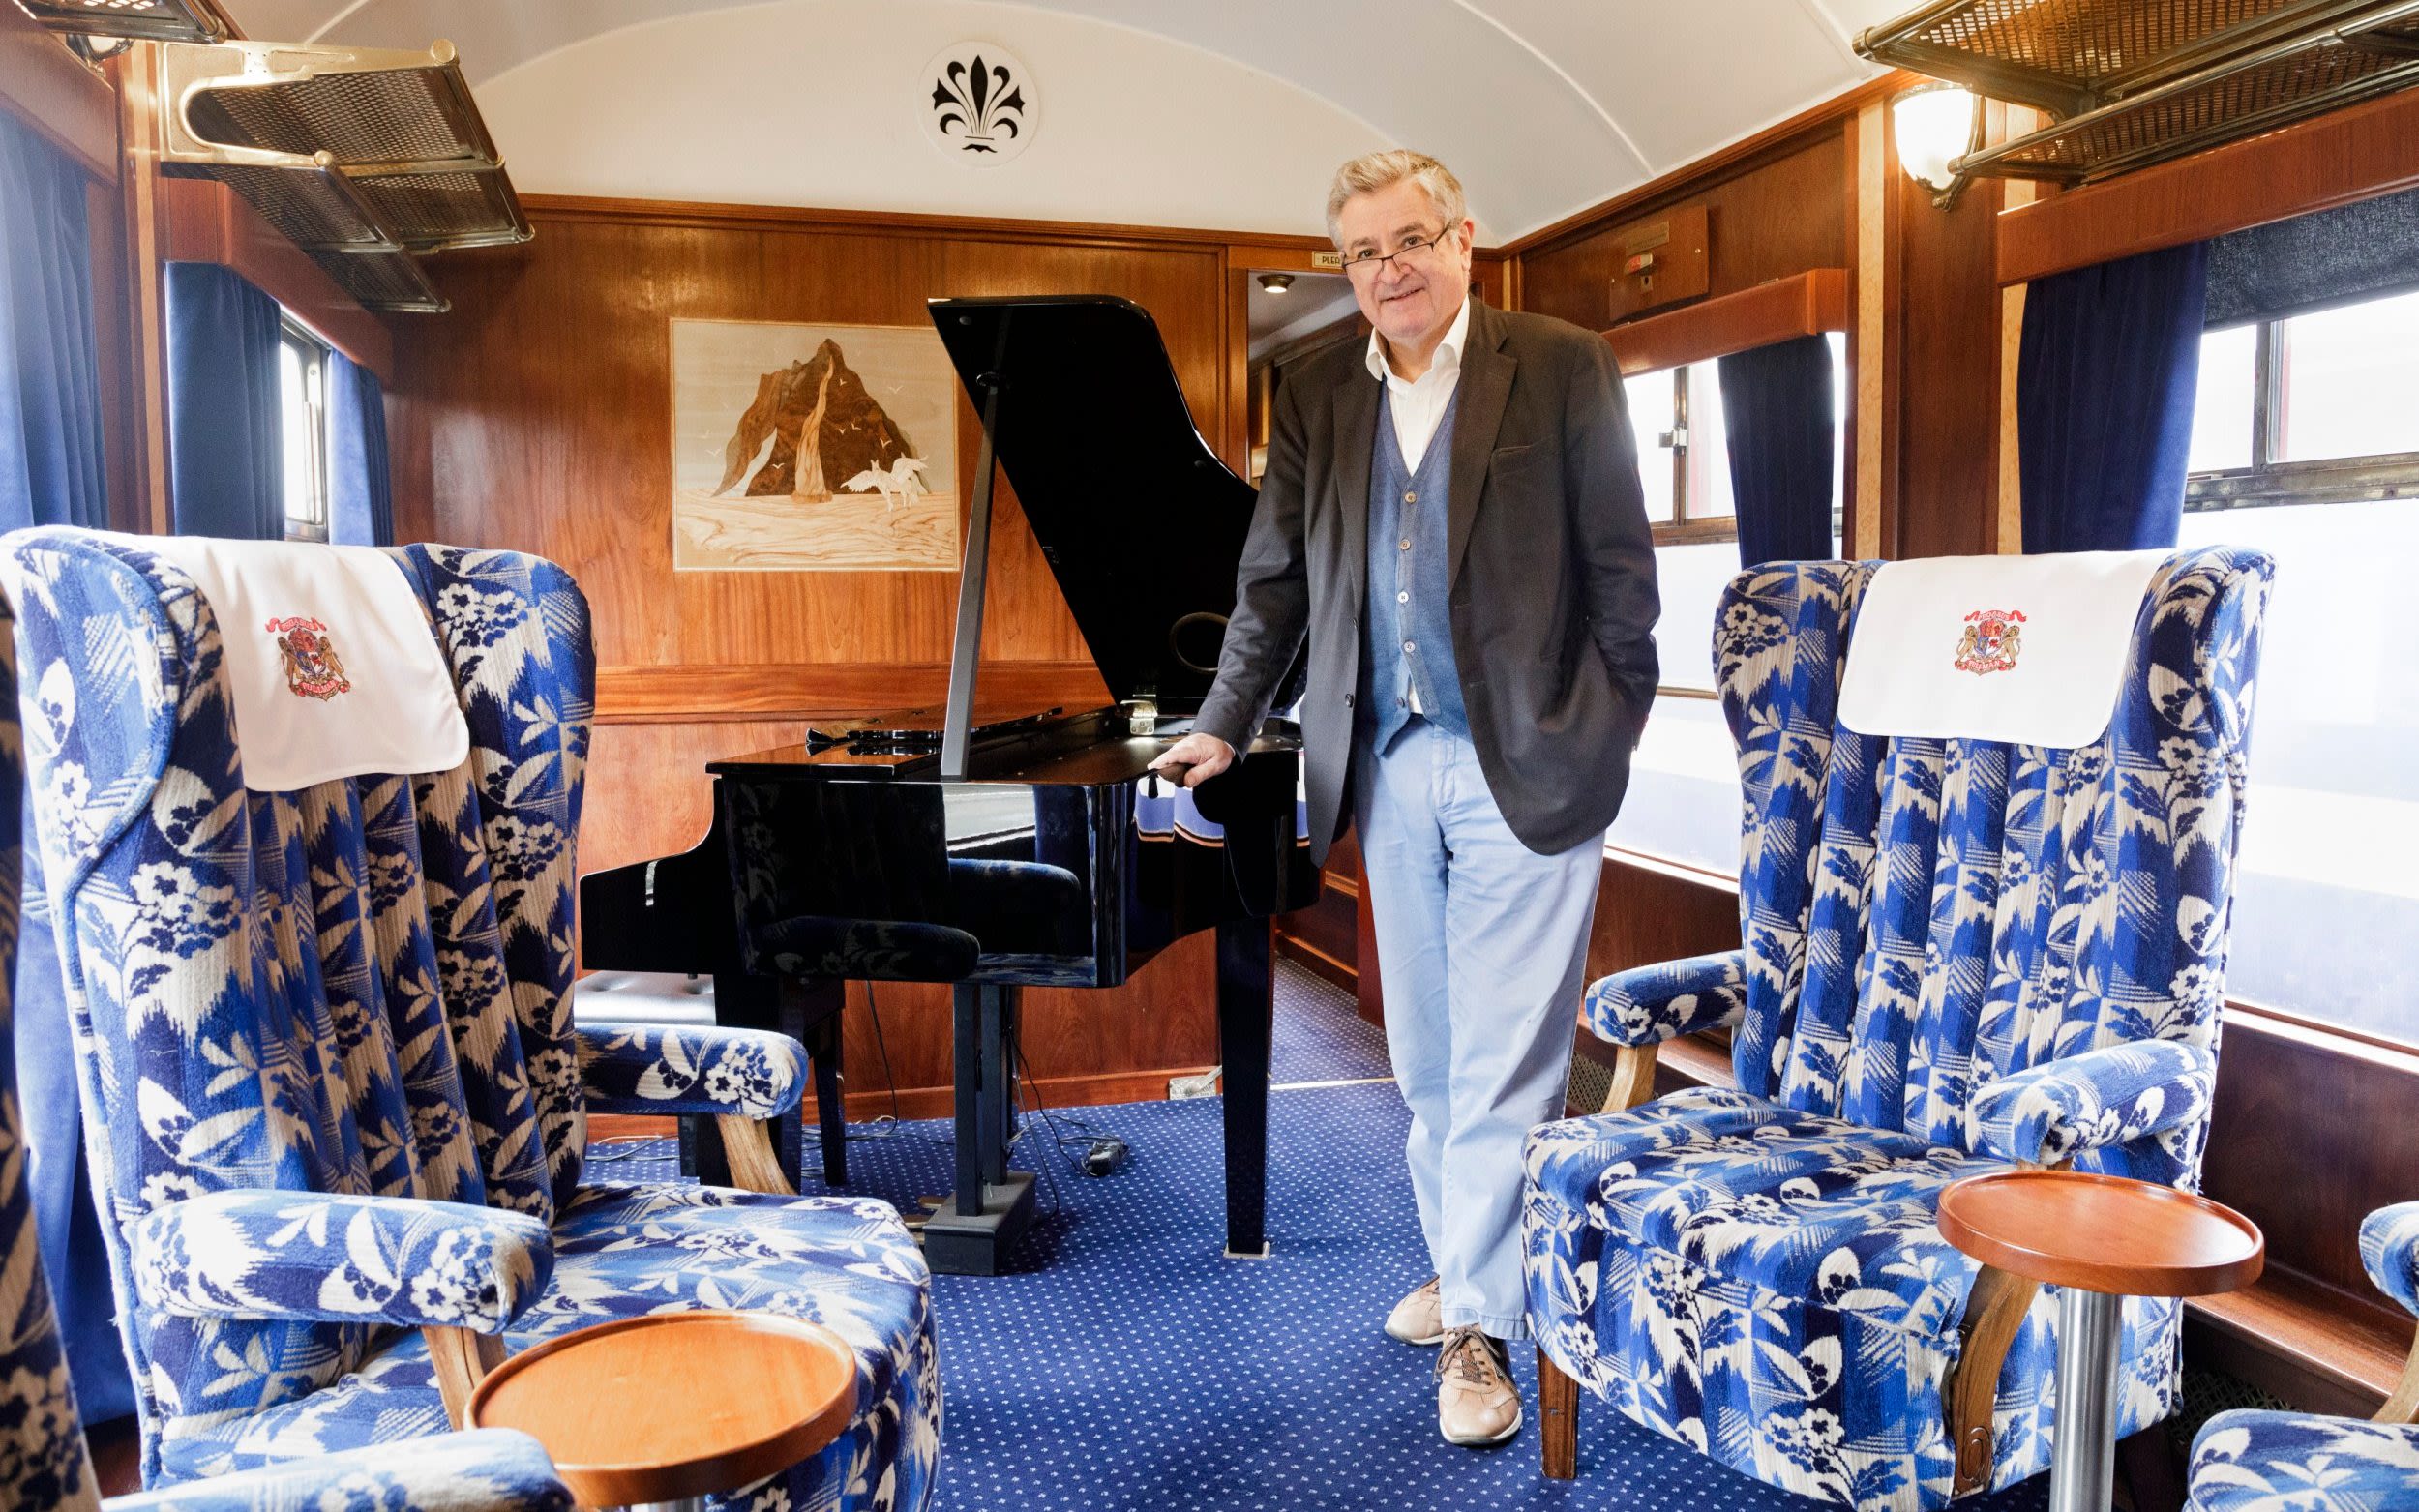 Meet the rail-mad millionaire with Britain’s only privately owned train